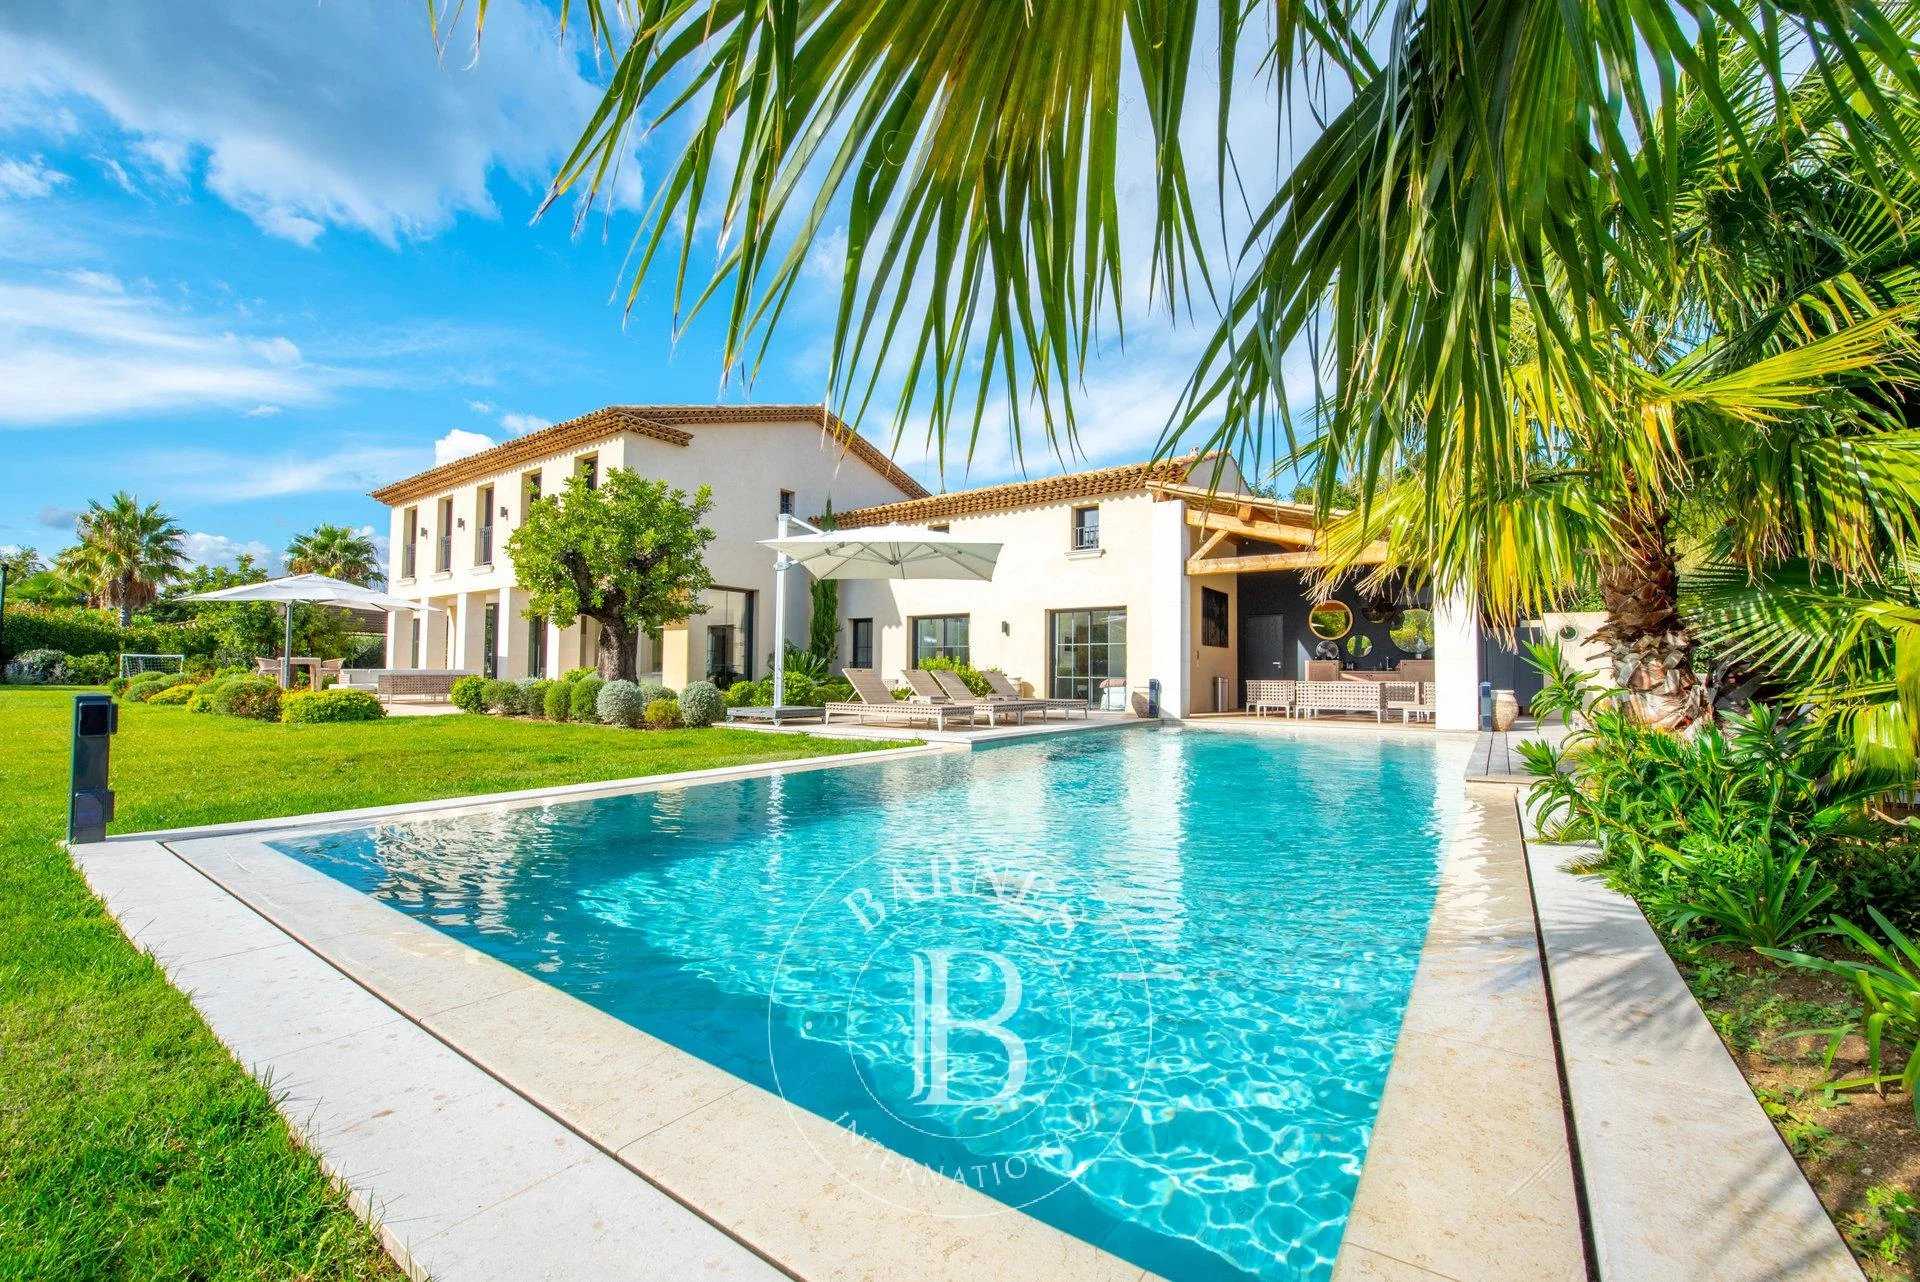 SAINT-TROPEZ - 6 BEDROOM VILLA -  SWIMMING POOL & JACUZZI- NEAR THE BEACH AND THE VILLAGE picture 19